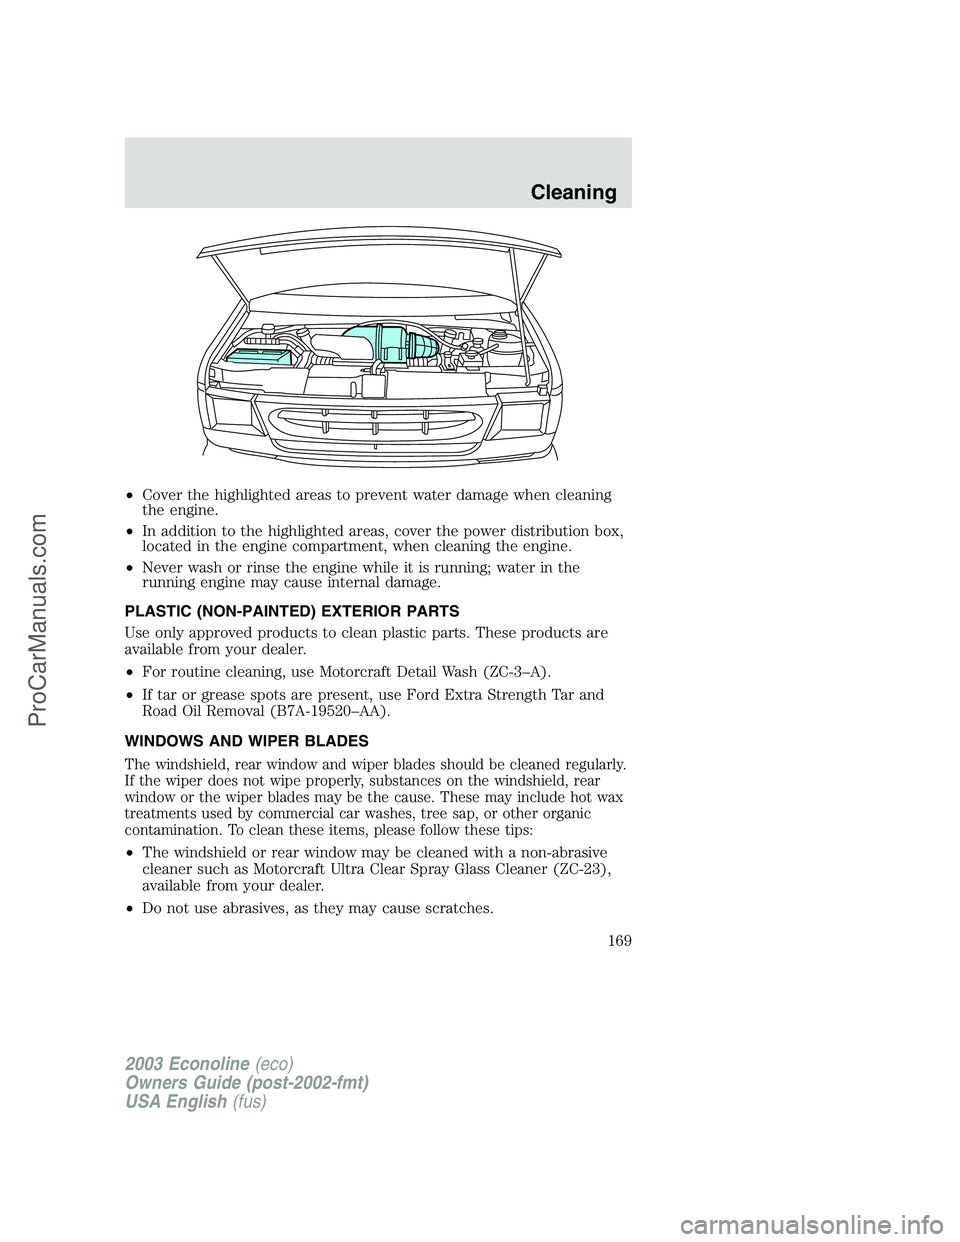 FORD E-350 2003  Owners Manual •Cover the highlighted areas to prevent water damage when cleaning
the engine.
•In addition to the highlighted areas, cover the power distribution box,
located in the engine compartment, when clea